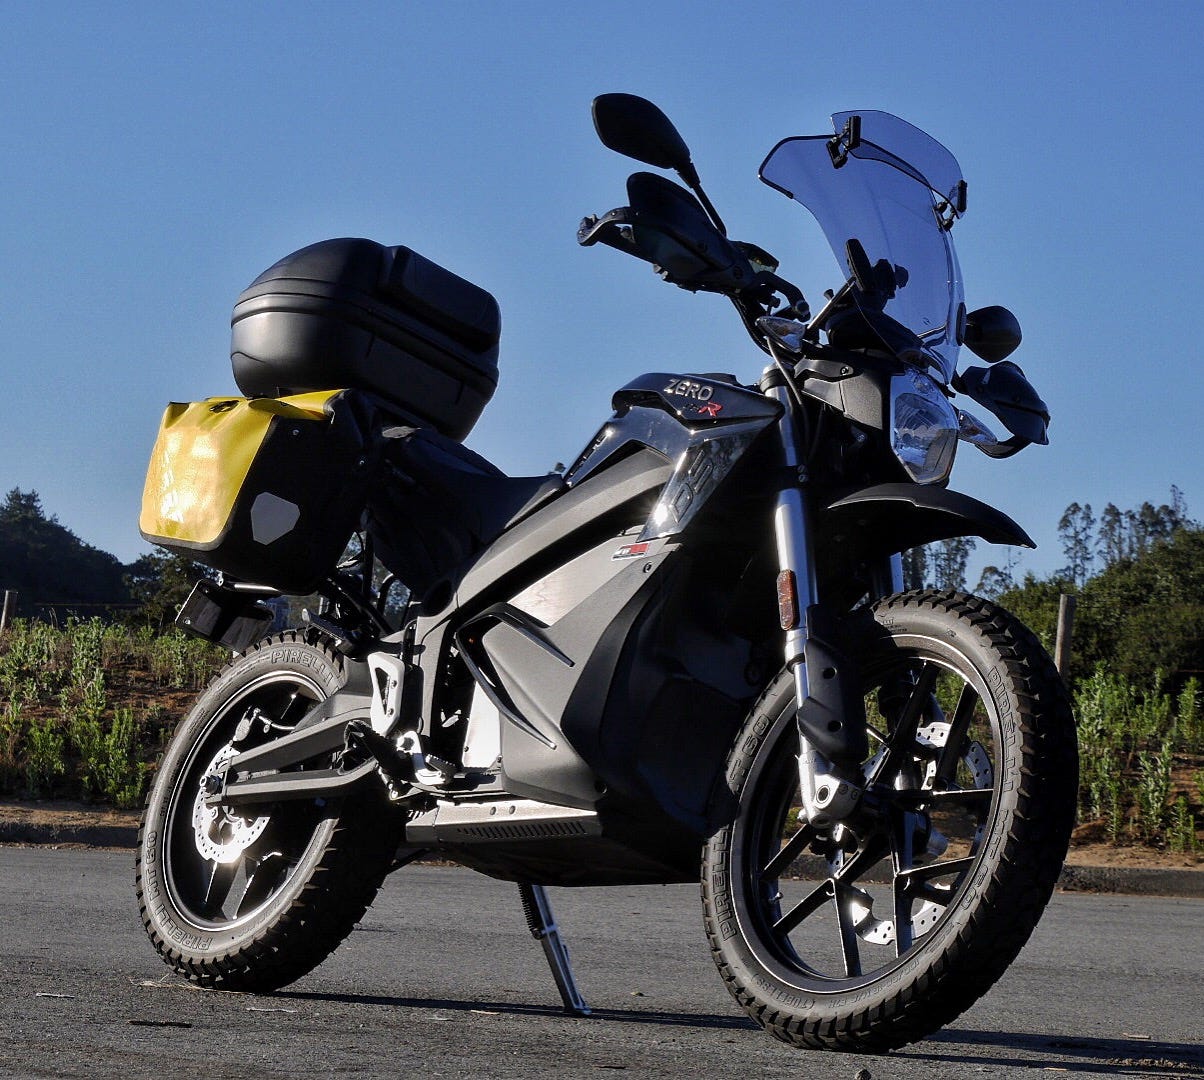 A black, electric motorcycle, parked on asphalt in the late afternoon. The motorcycle is a Zero DSR, an adventure style motorcycle, with a large 19" front tire with aggressive tread, and a 17" rear tire with similar tread. The motorcycle has a single headlight, hand protectors, and a large, two-piece windshield. A large black box hangs from the frame where a gas-powered engine usually sits. That is the battery. Two yellow and black saddlebags sit on the back of the bike, along with a hard-shelled topcase on the back. The bike is modern and contemporary in style